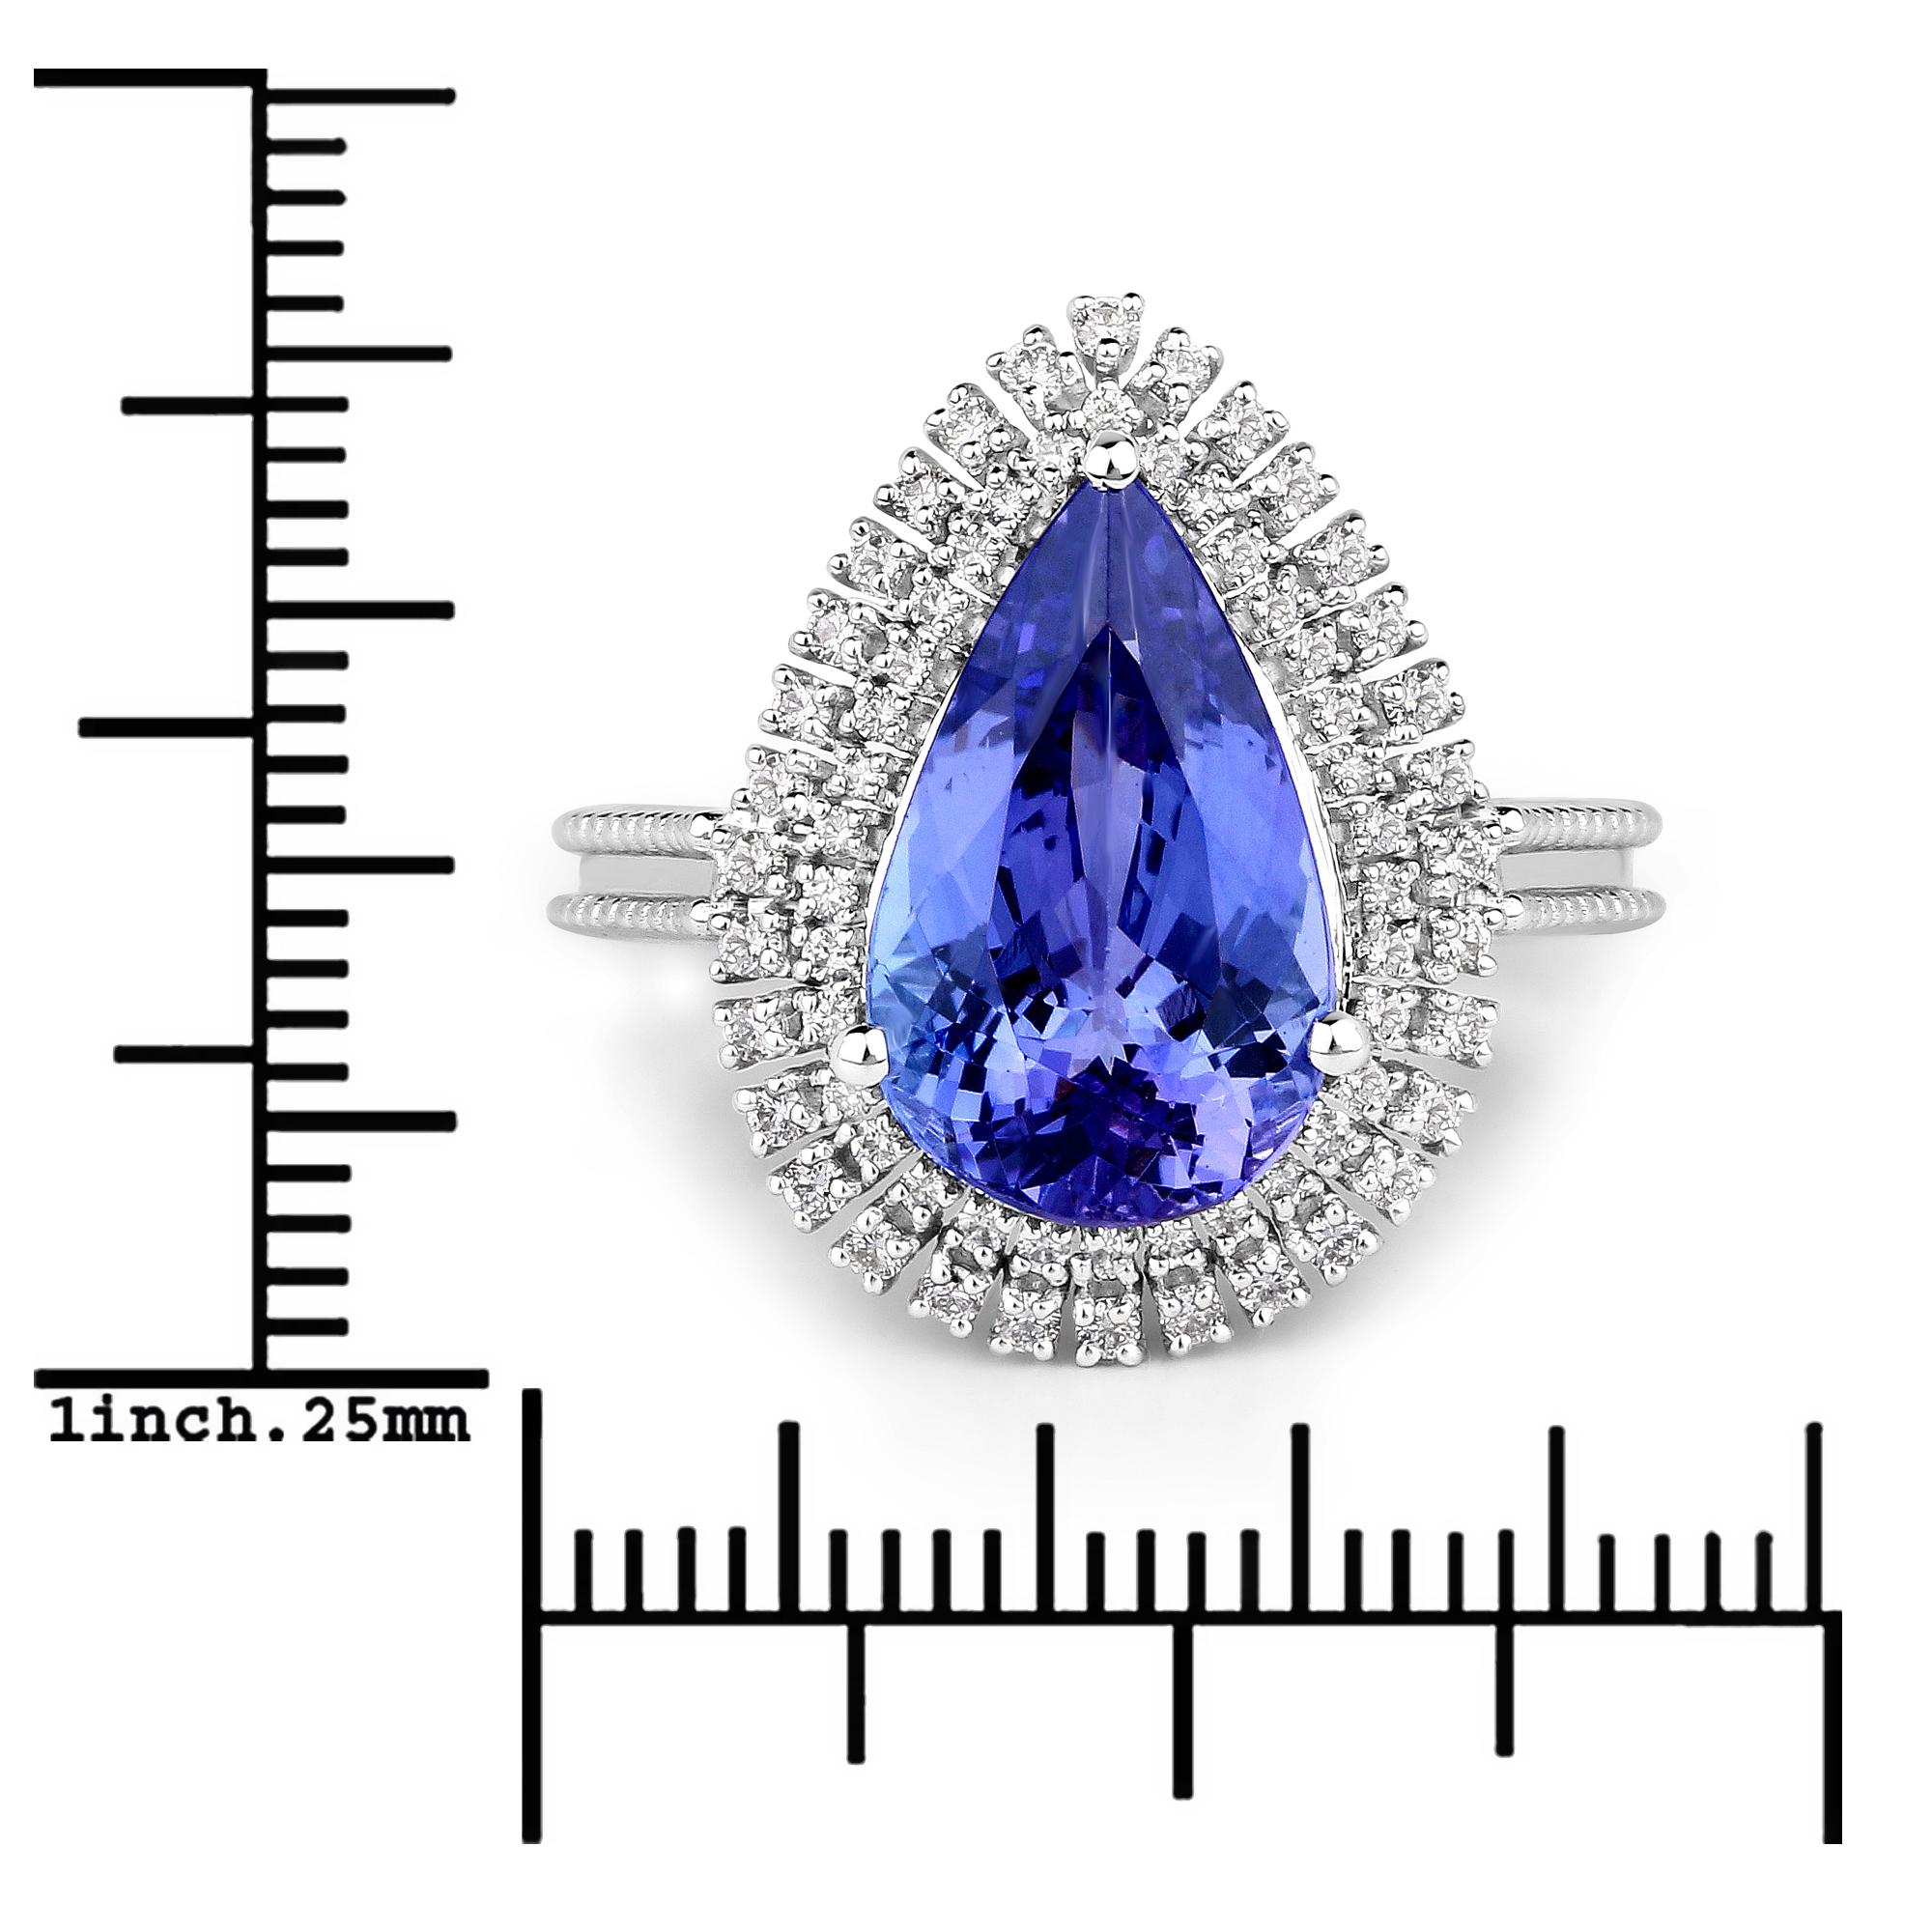 5.63 Carat Genuine Tanzanite and White Diamond 14 Karat White Gold Cocktail Ring In New Condition For Sale In Great Neck, NY